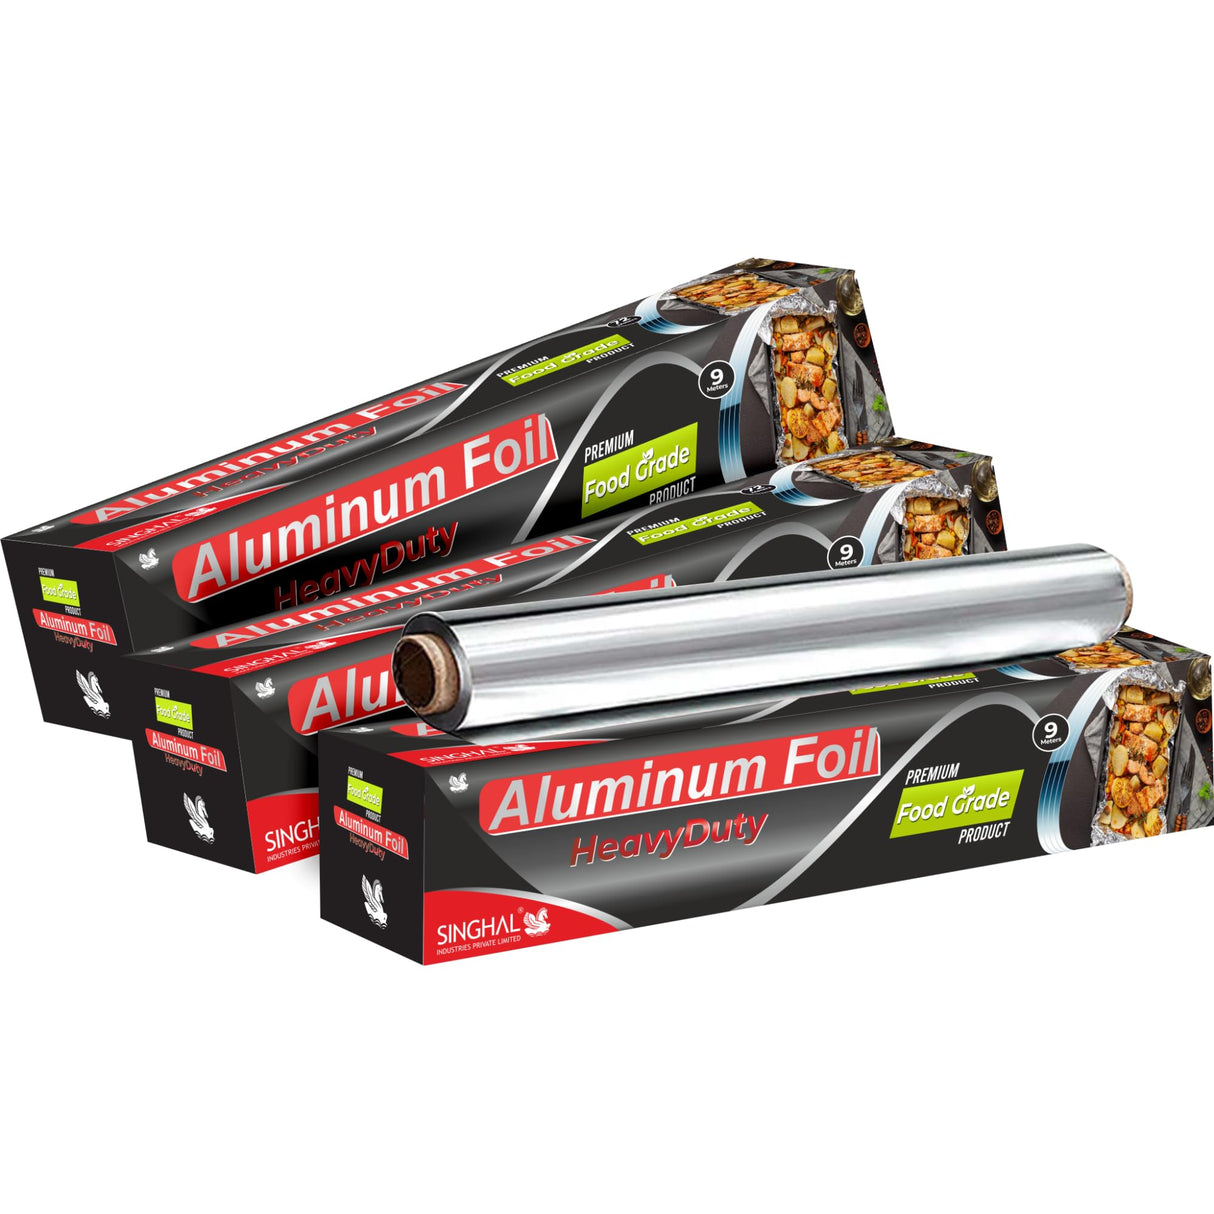 Singhal Aluminum Foil 27 Meters, 11microns | Aluminium Silver Foil for Kitchen, Food Packing, Wrapping, Storing and Serving (9 Mtr x Pack of 3)